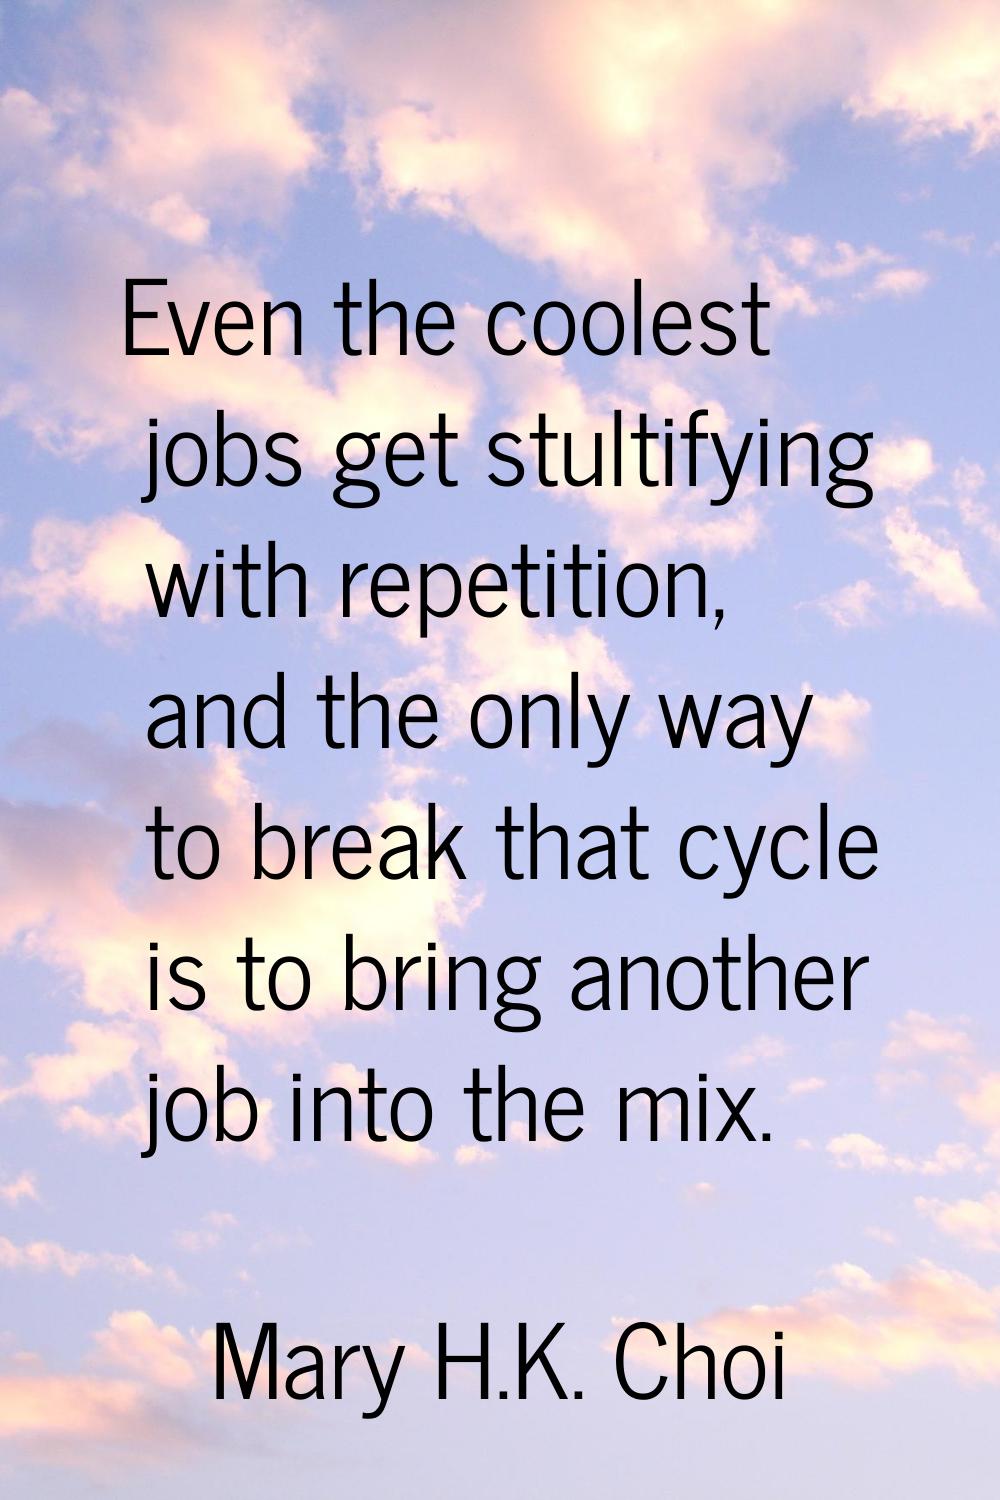 Even the coolest jobs get stultifying with repetition, and the only way to break that cycle is to b